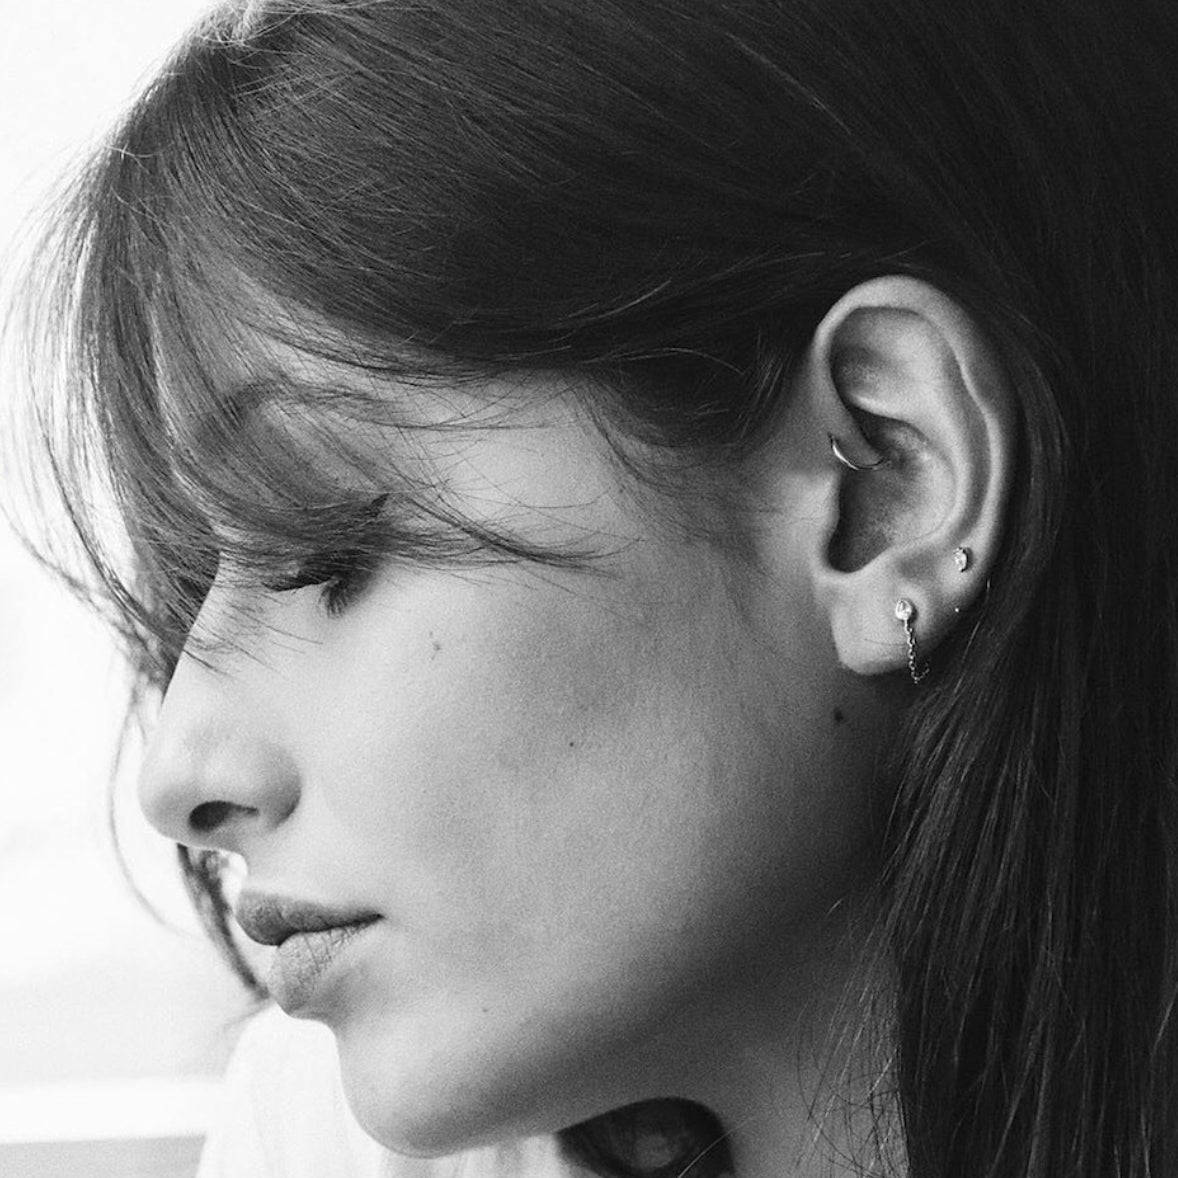 Tragus Piercing - The Experts answer All Your Questions